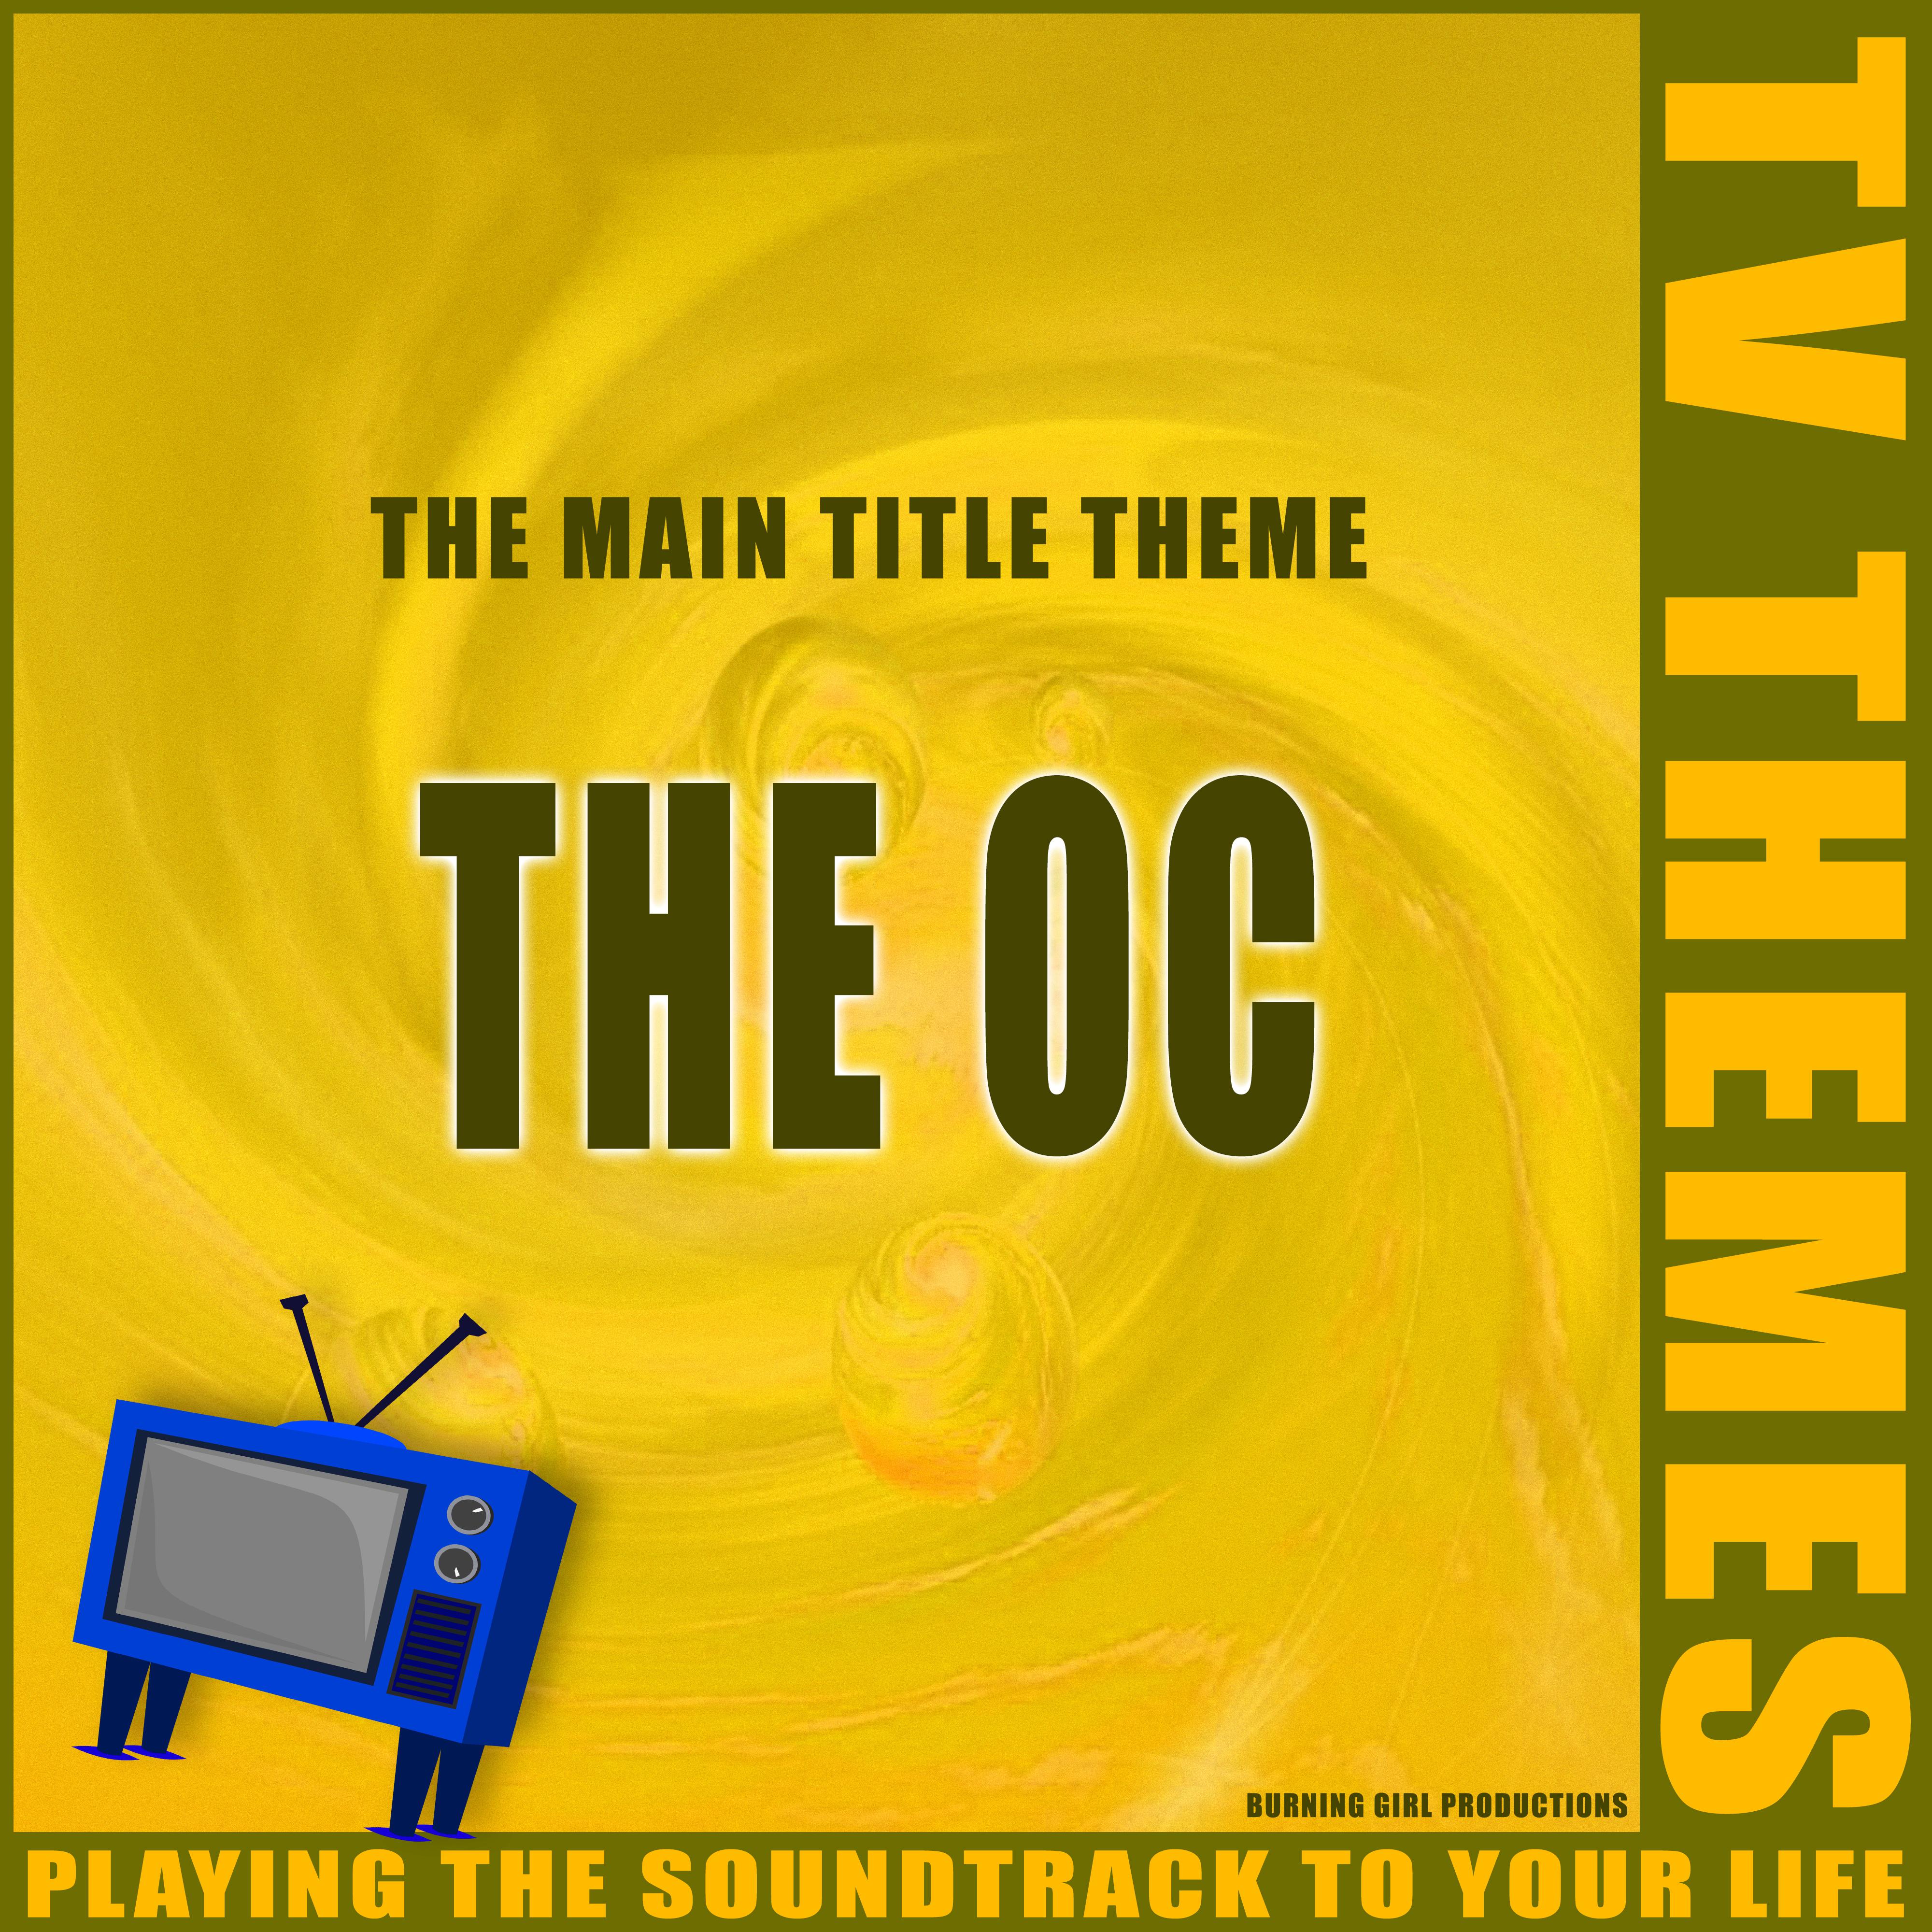 The Main Title Theme - The OC